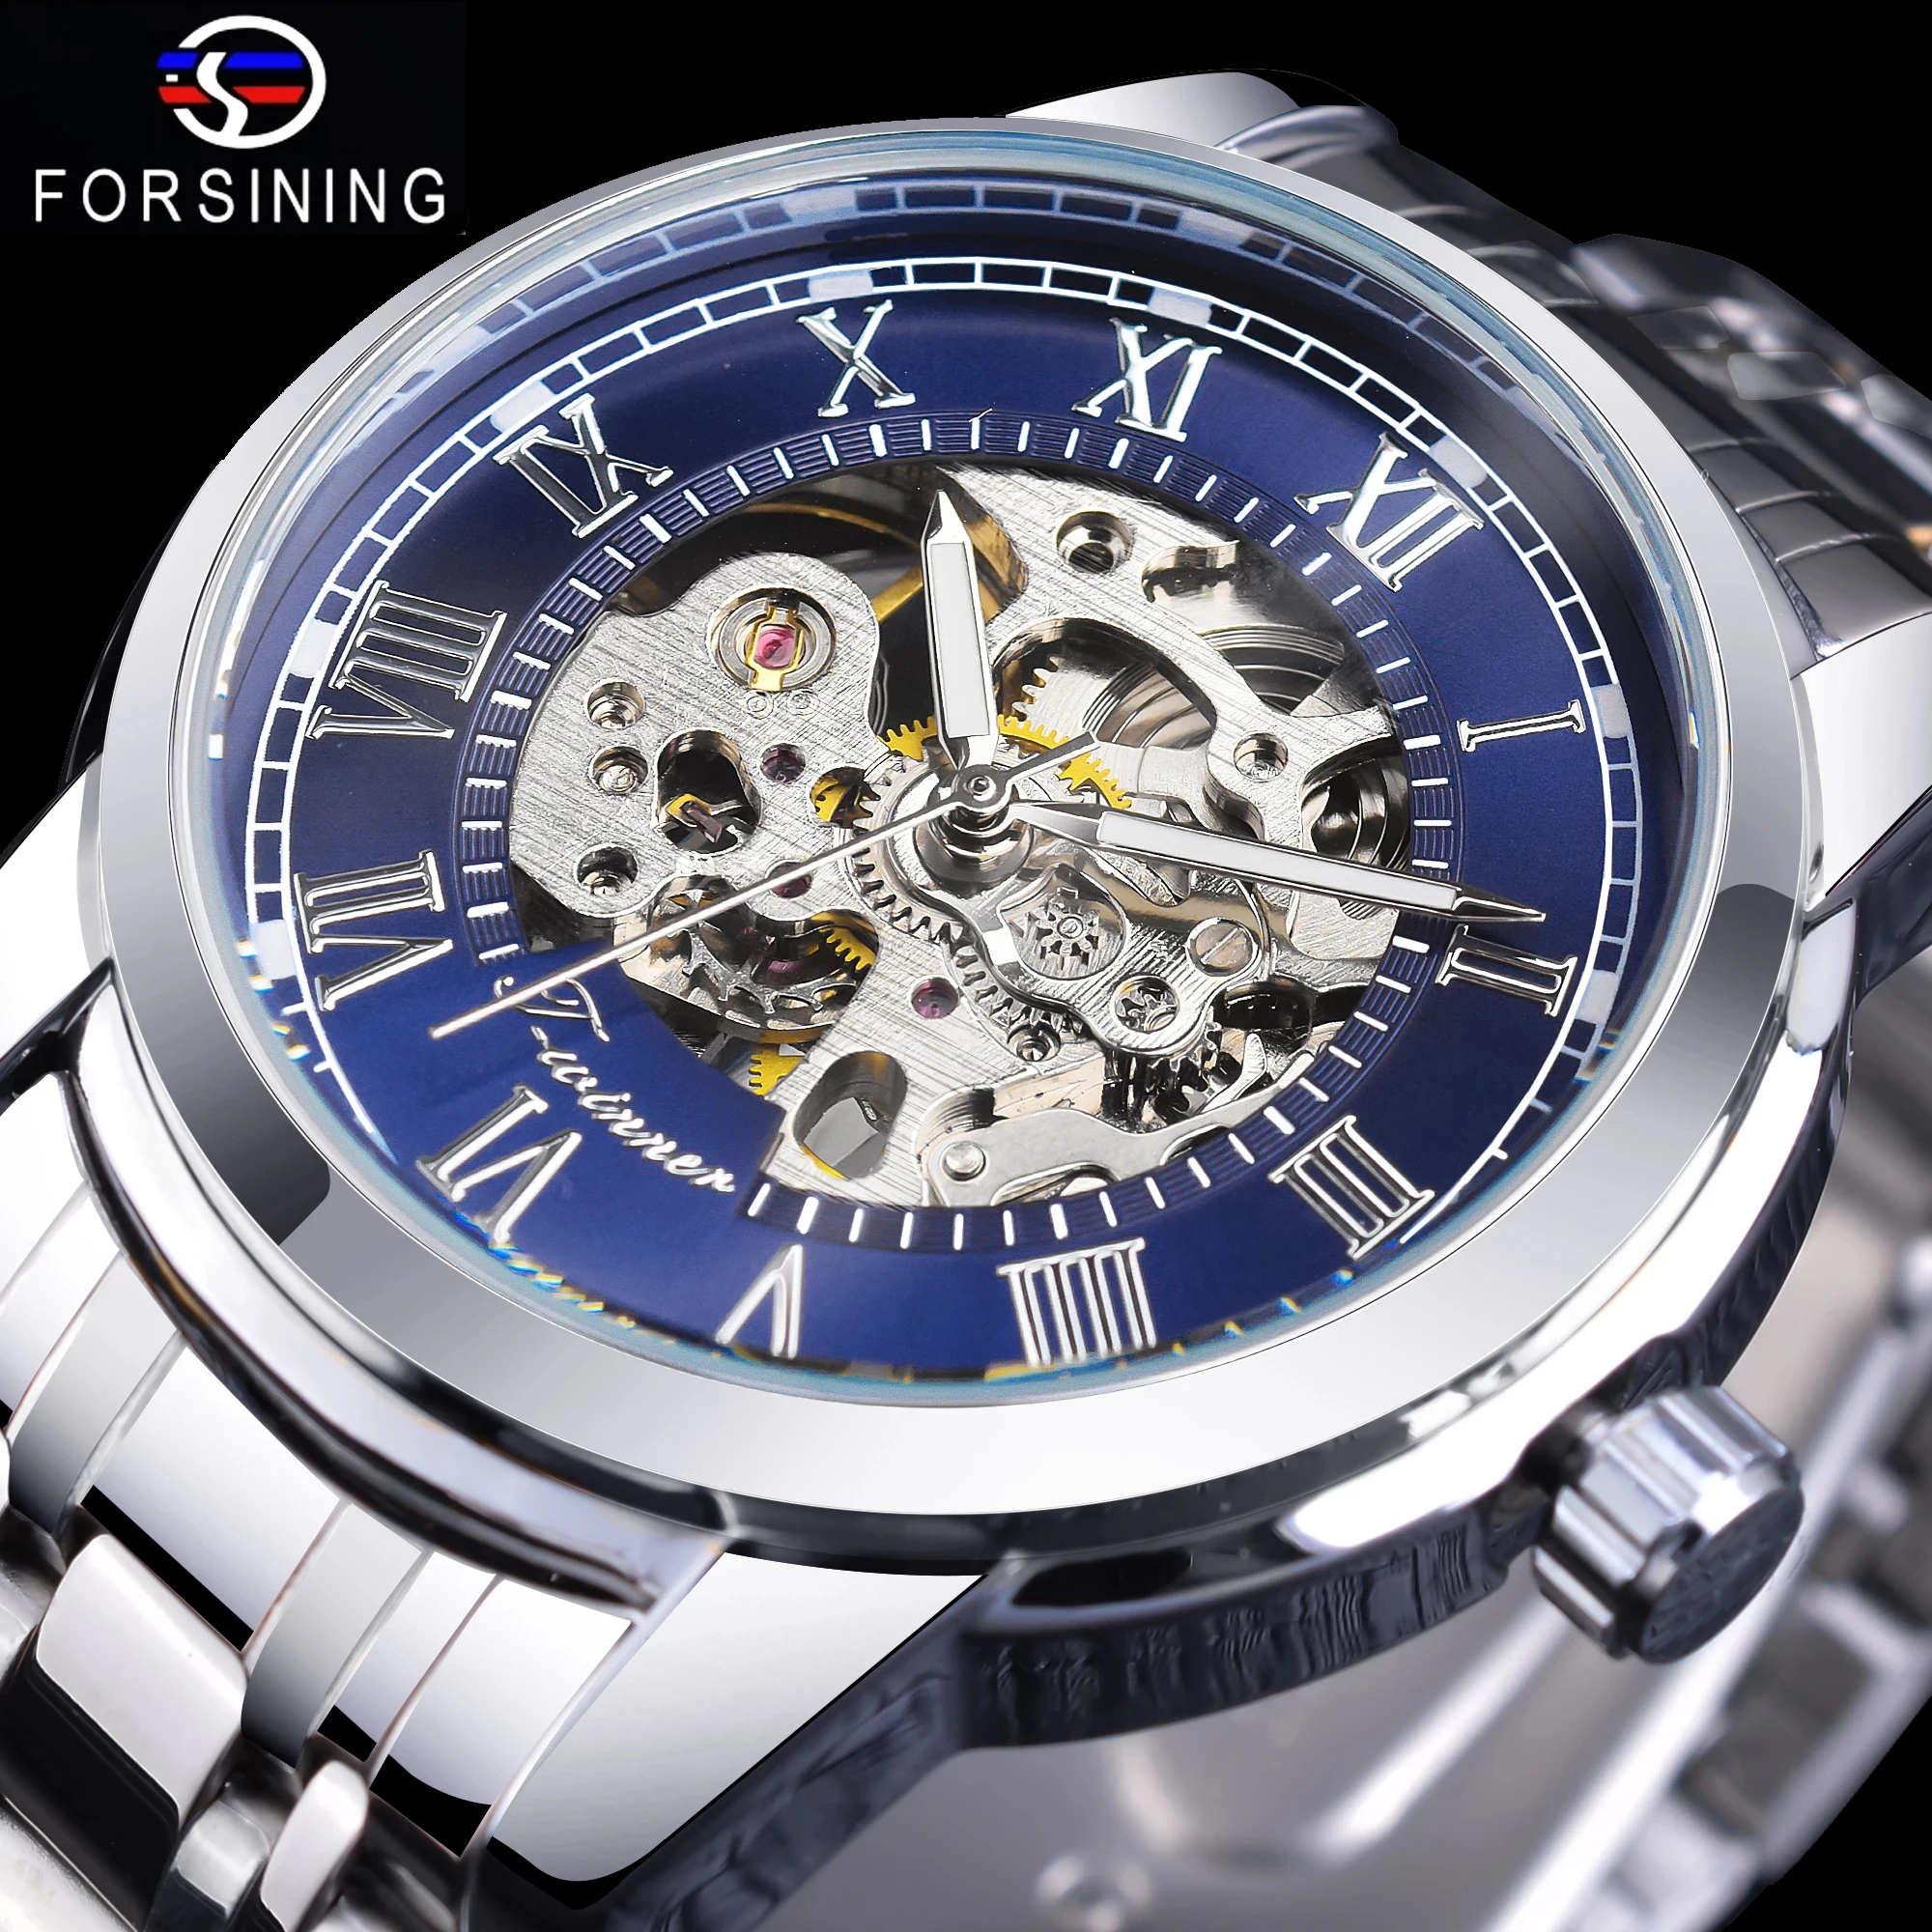 Forsining Hollow Open Work Blue Dial Silver Stainless Steel Waterproof Retro 3D Skeleton Automatic Mechanical Wrist Watch Clock men genuine leather belt metal automatic buckle leather high quality belts for men business work casual strap